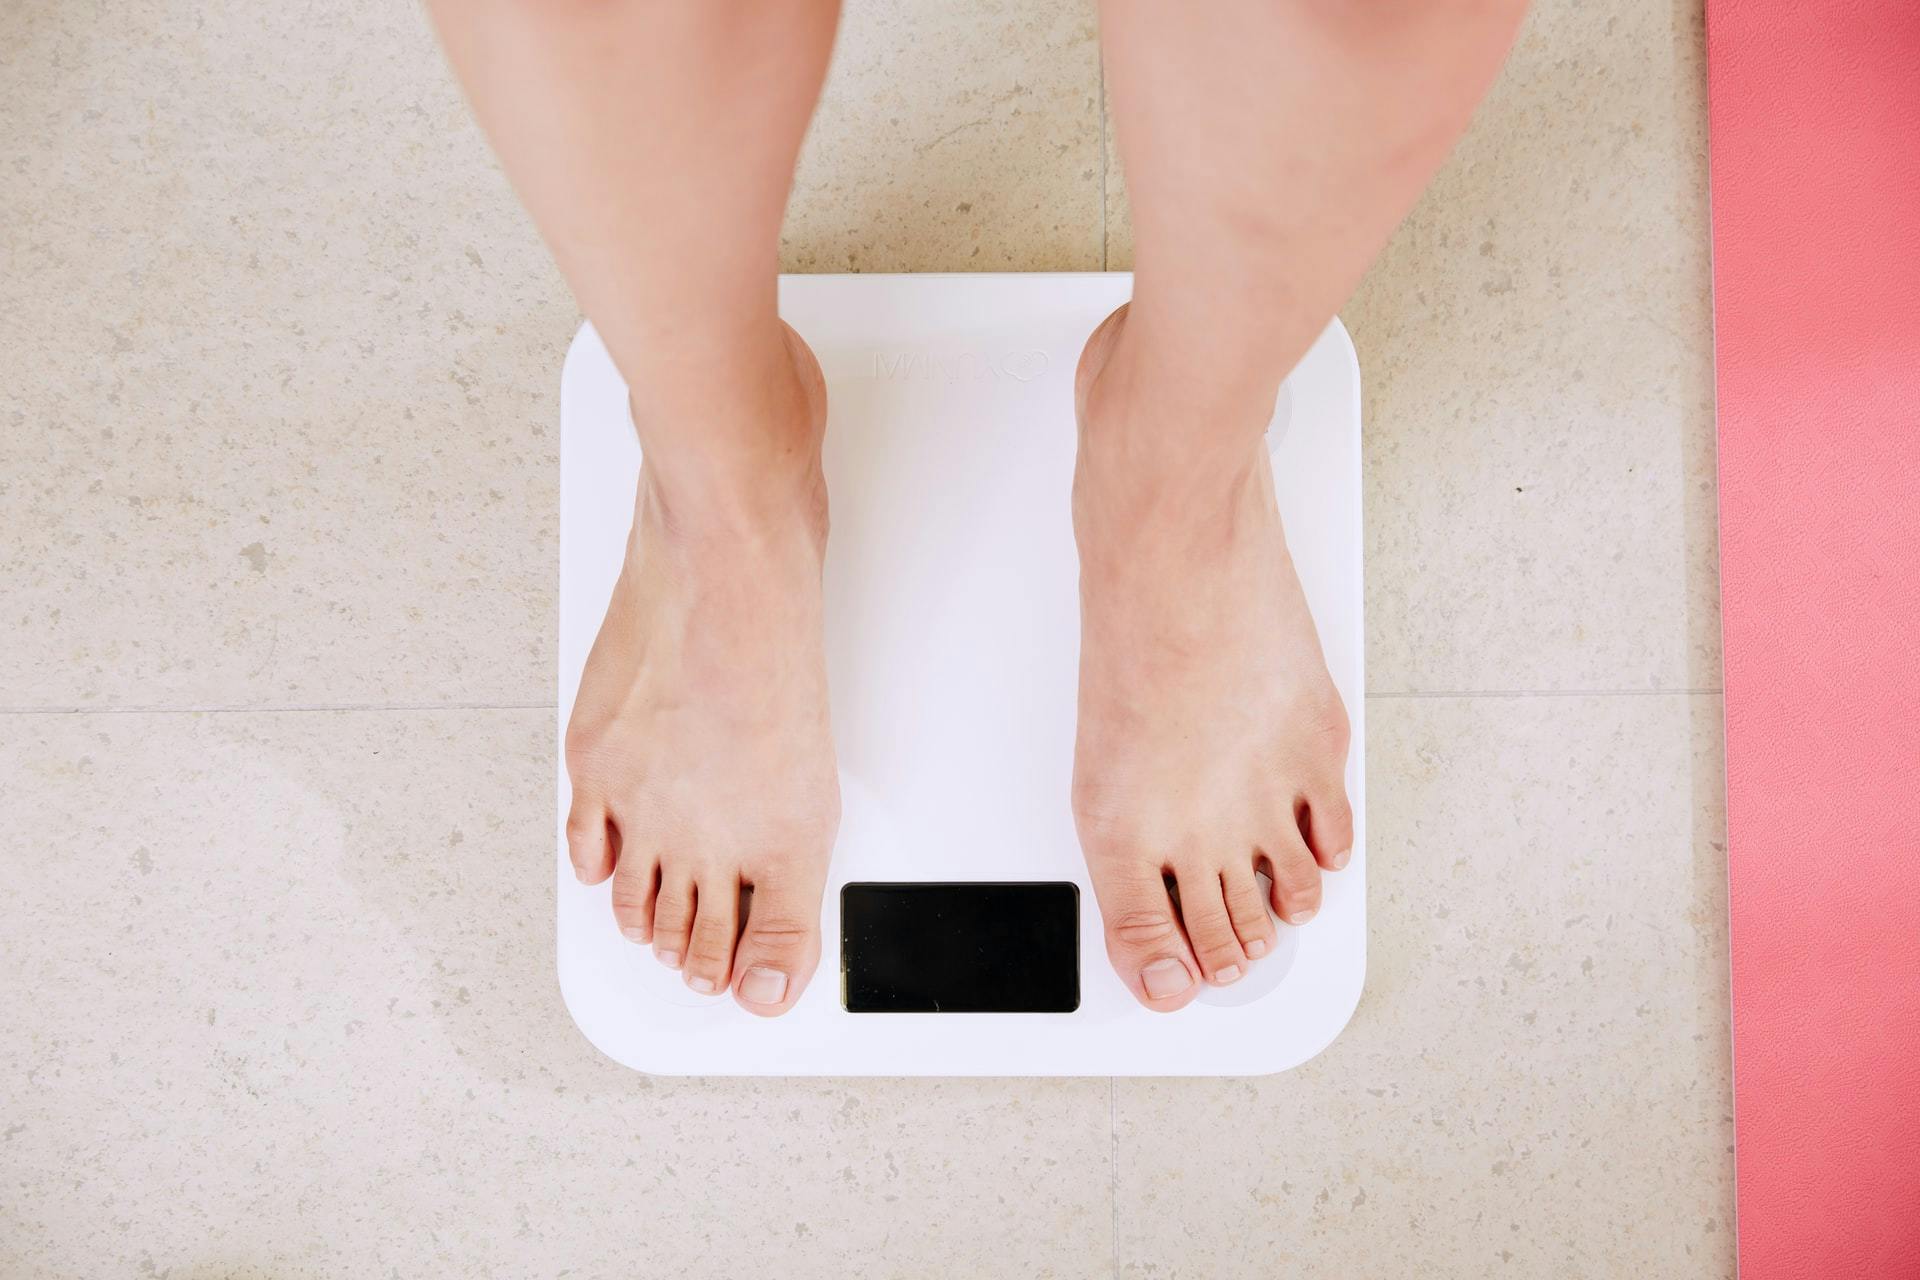 Feet on scale how does Medicare obesity therapy work.jpg